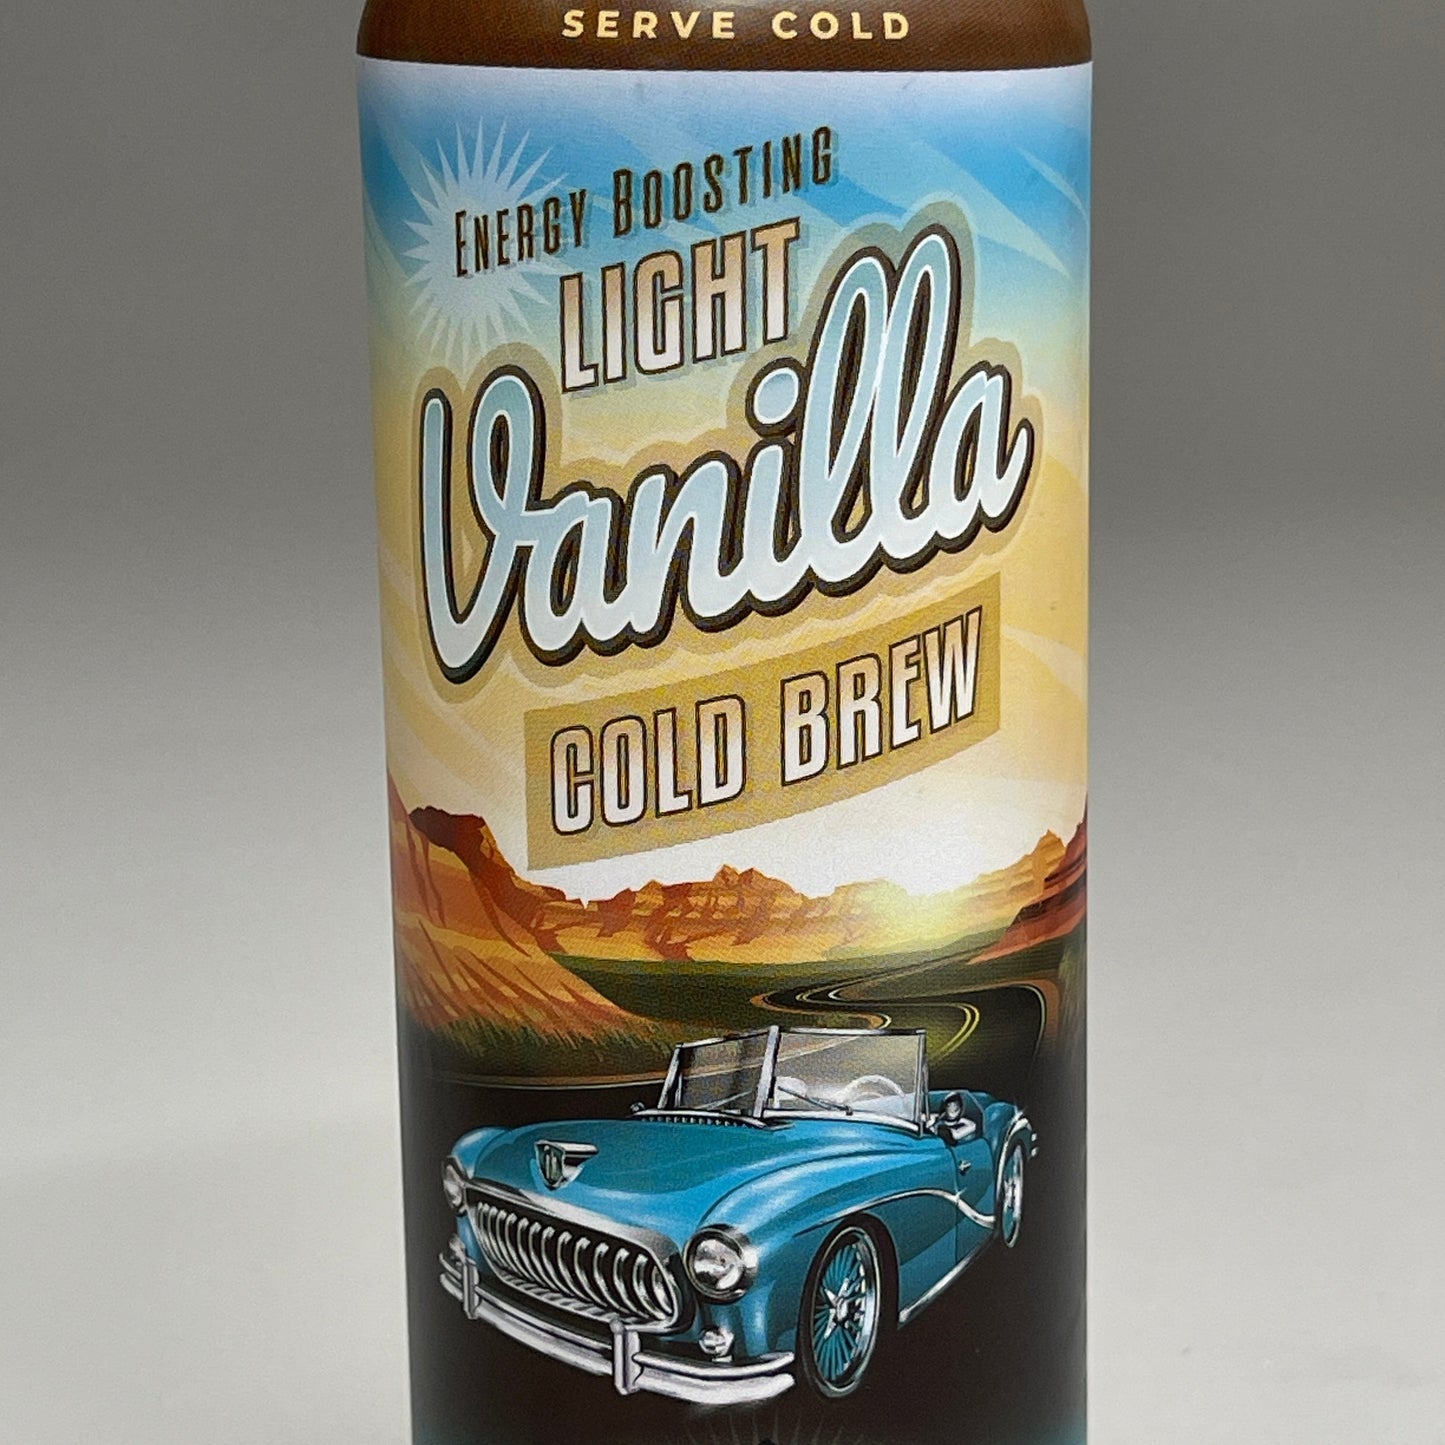 ZA@ 12 CANS! OPEN ROAD ROUTE 66 Energy Boosting Light Vanilla Cold Brew Drink 11.5 fl oz (06/24) Premium Coffee D